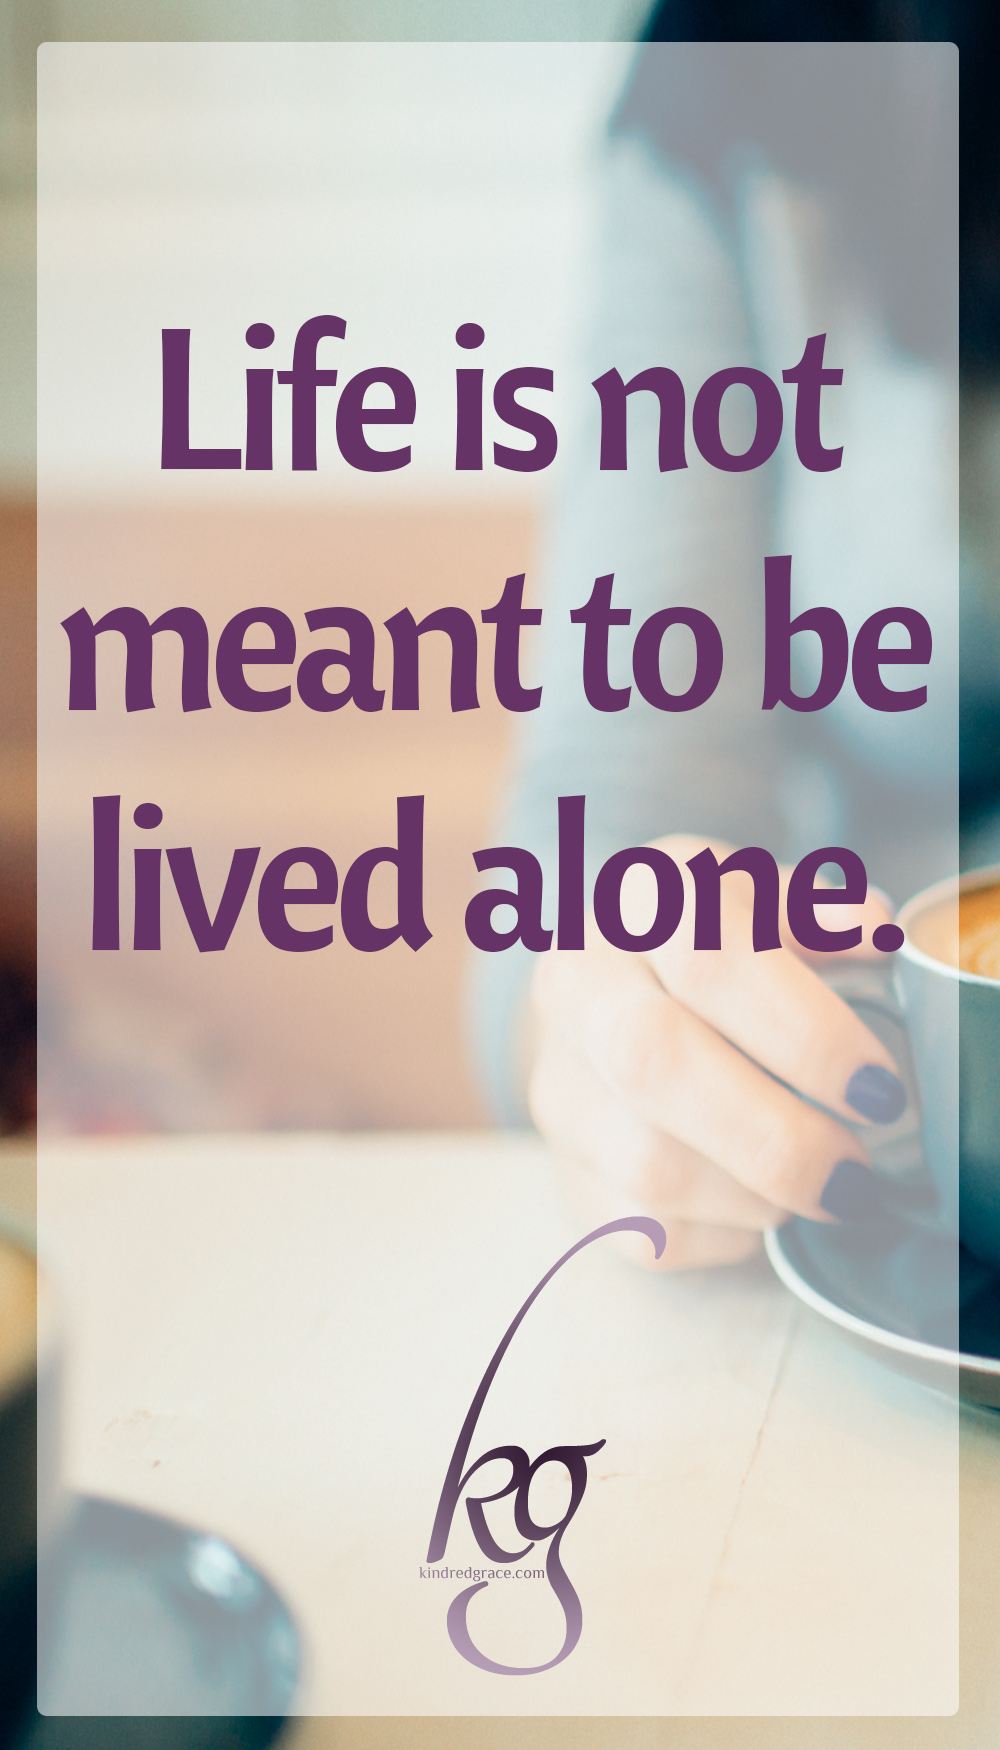 Why Life Is Not Meant to Be Lived Alone via @KindredGrace